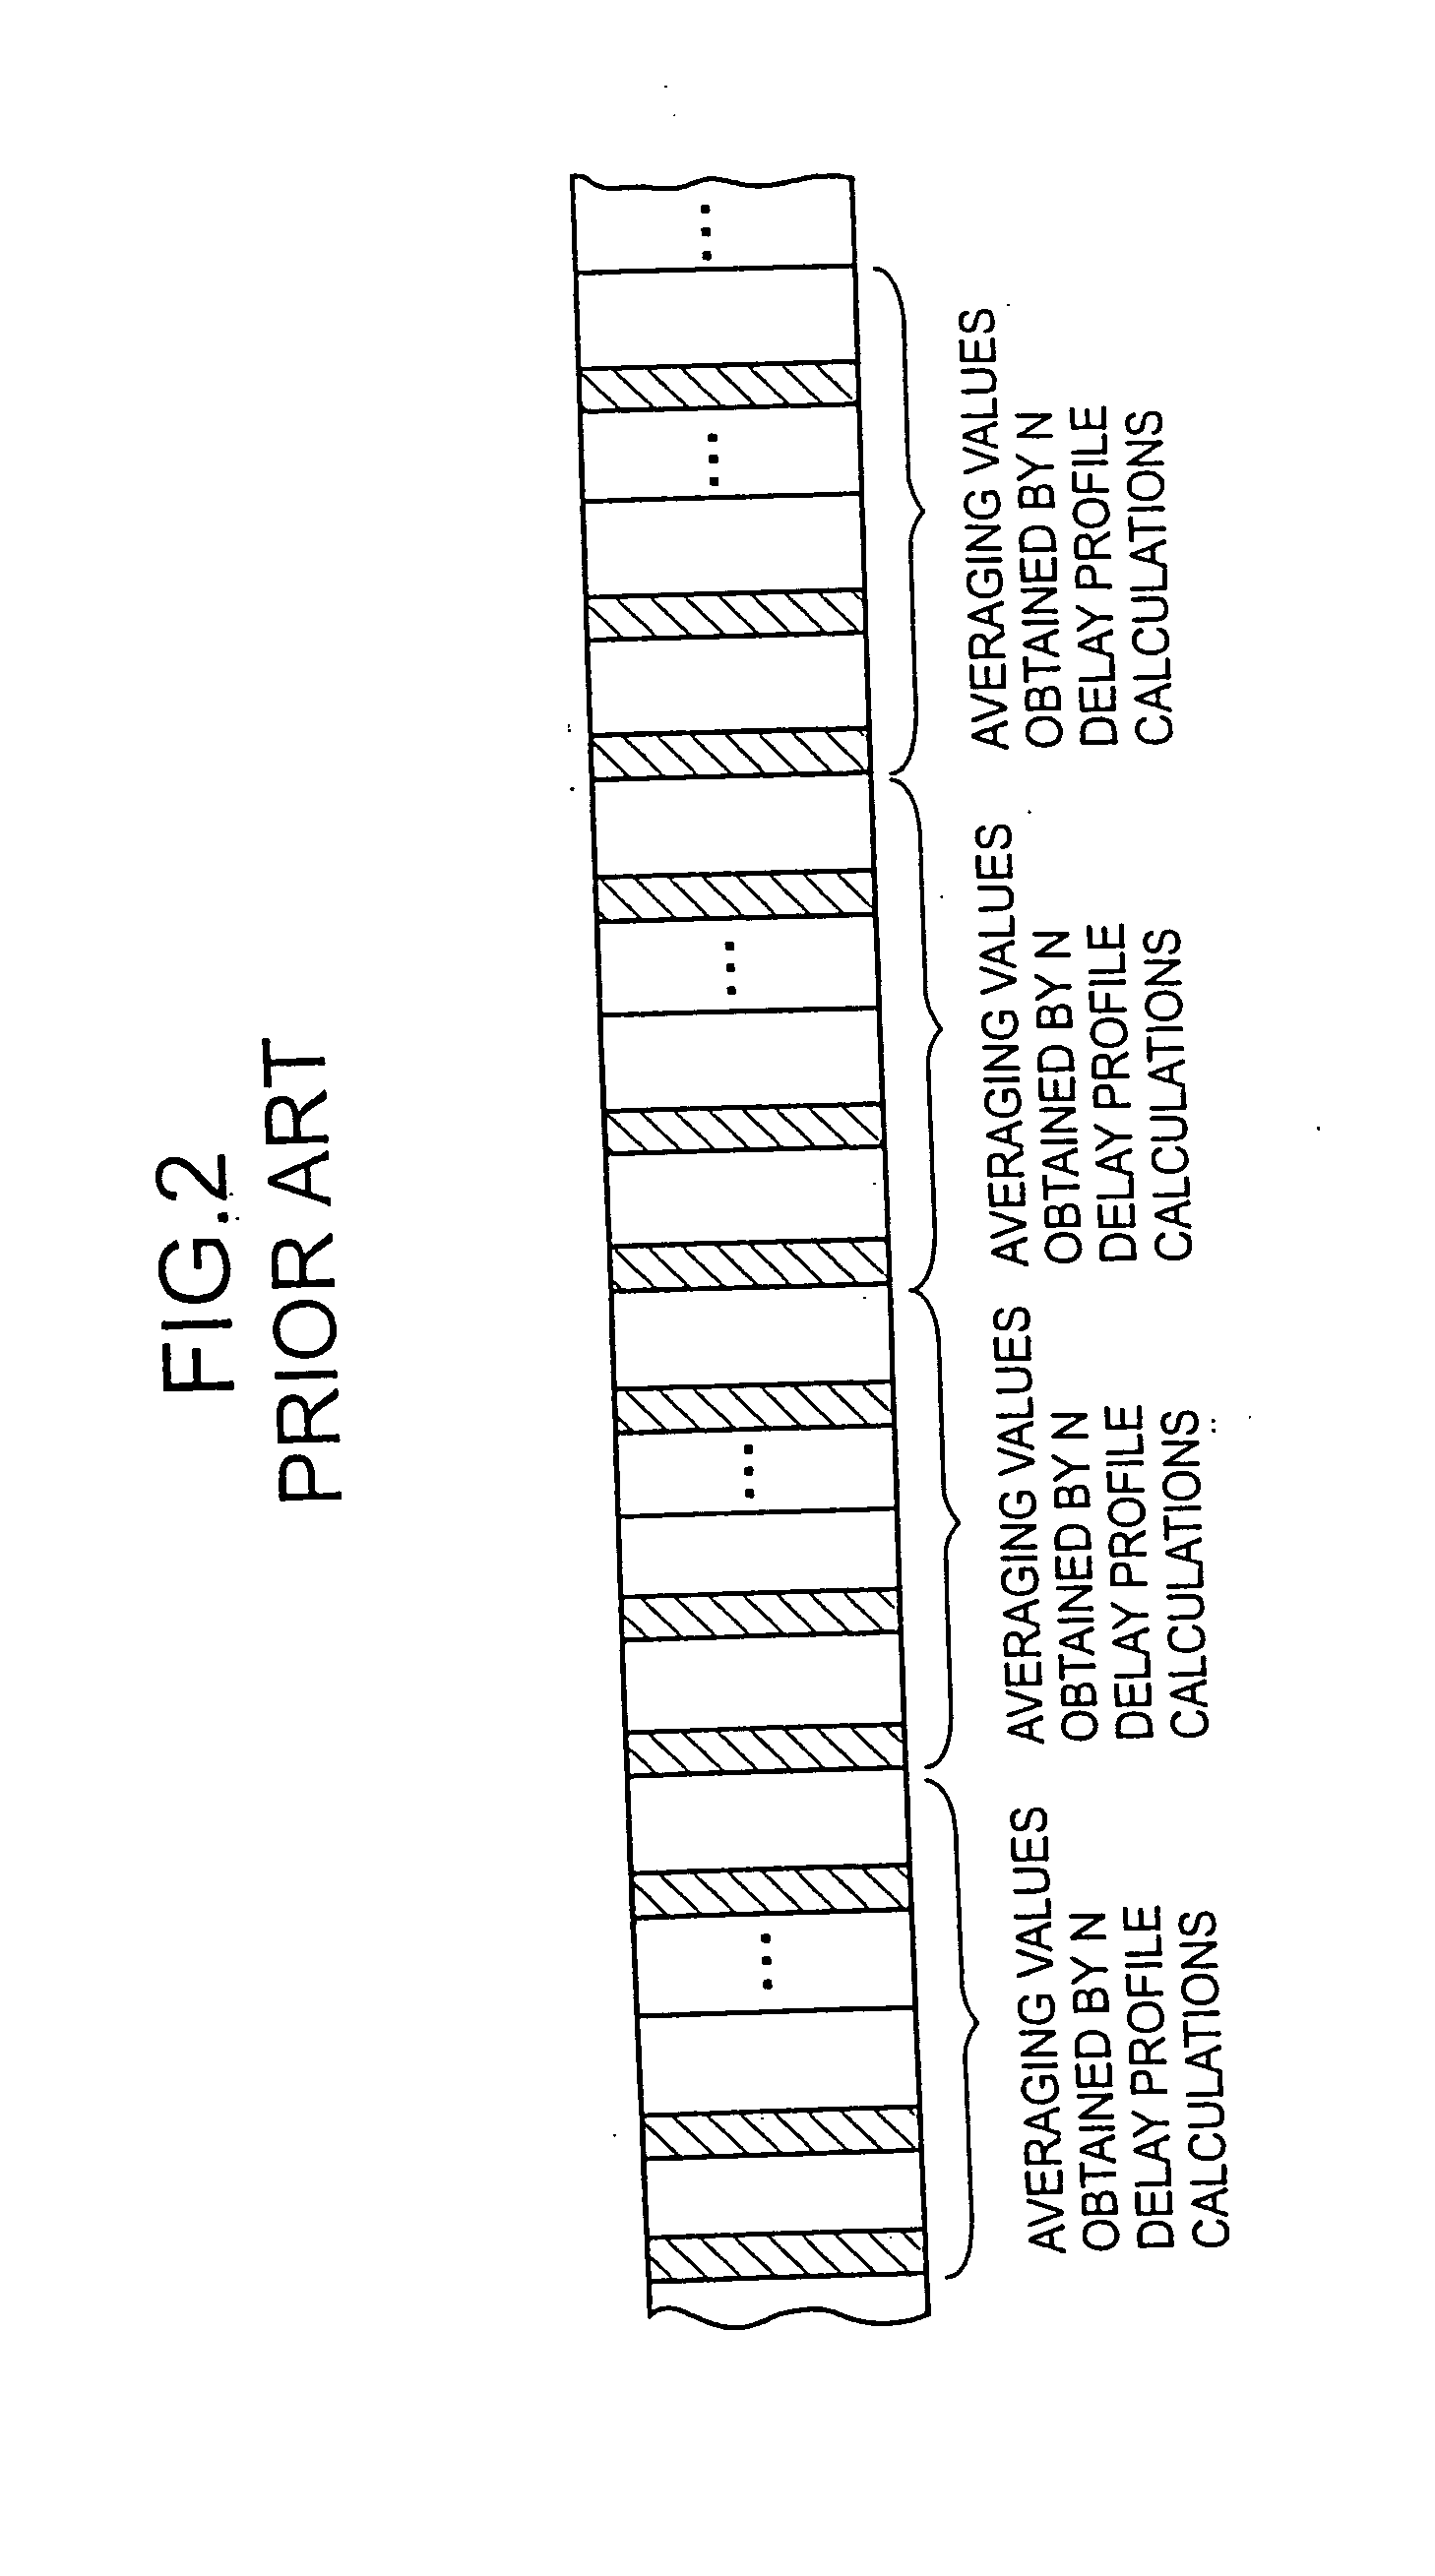 Radio communication apparatus used in CDMA communication system, which has fingers and is designed to perform rake reception, and power consumption control method therefor